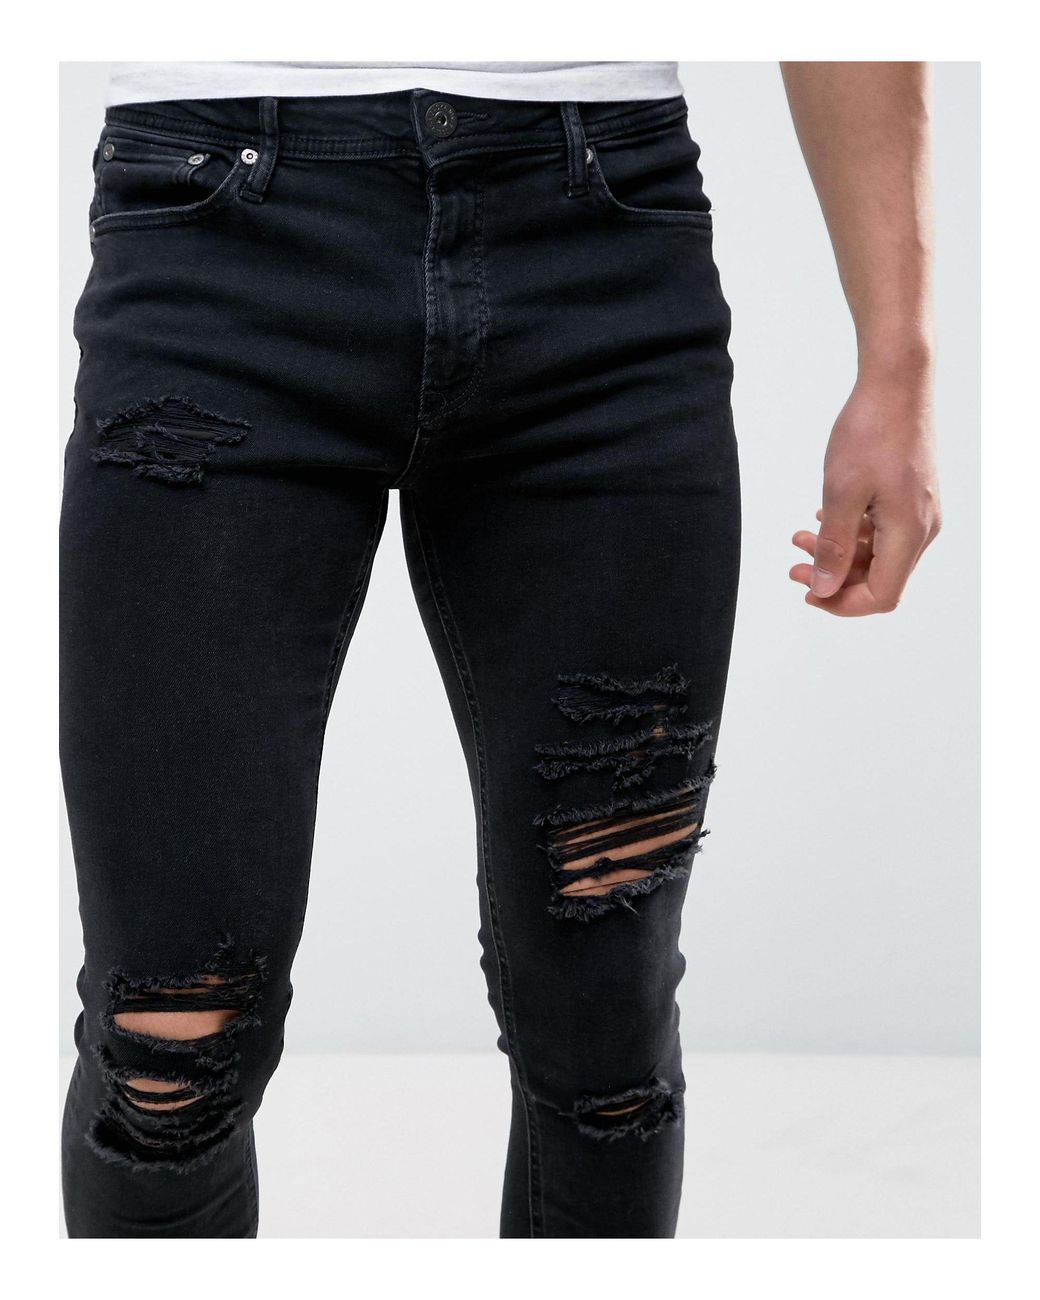 Jack & Jones Intelligence Liam Skinny Fit Ripped Jeans in Black for Lyst